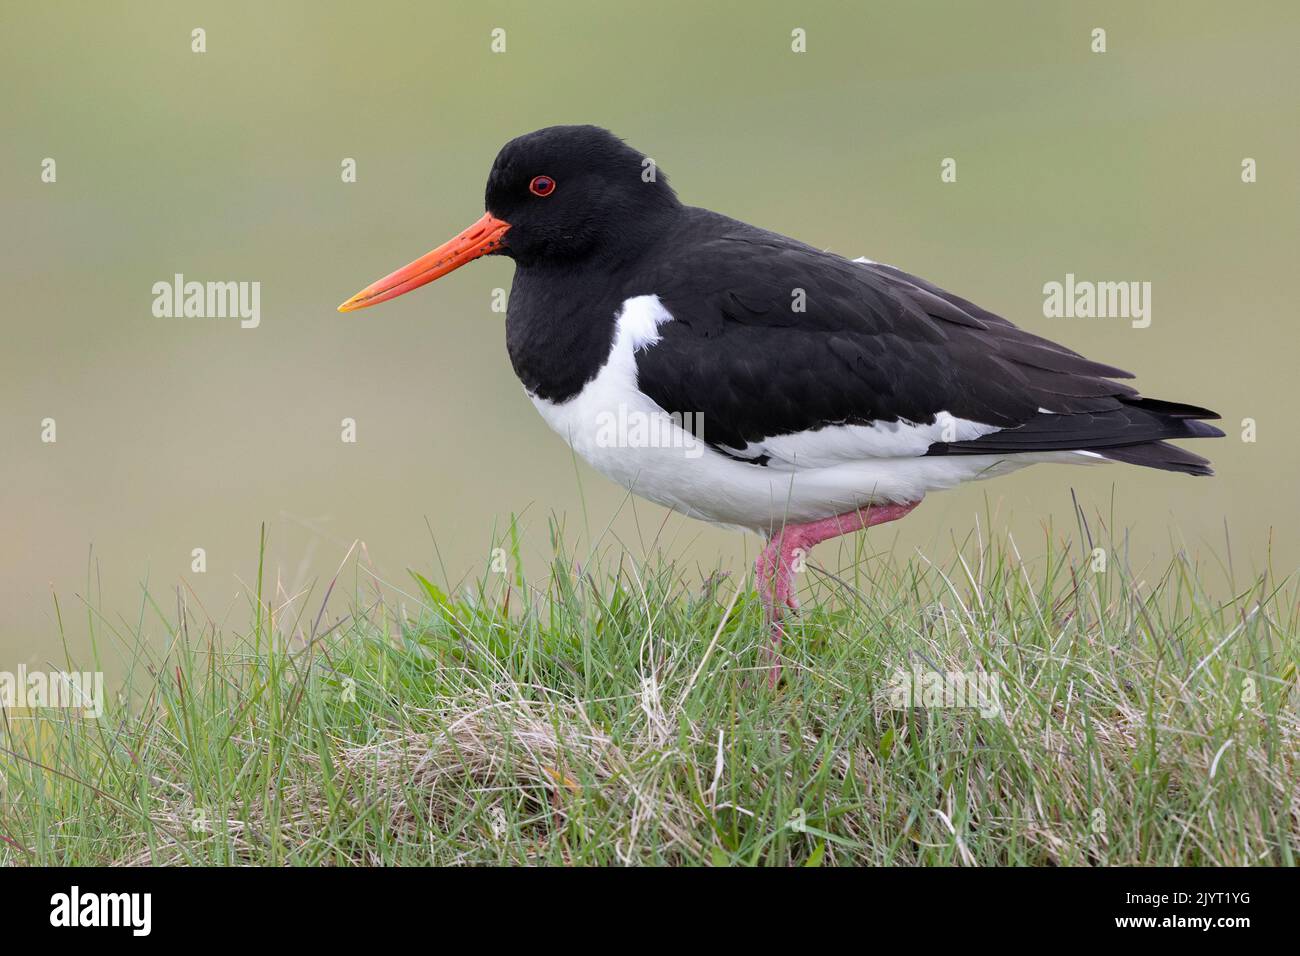 Eurasian Oystercatcher (Haematopus ostralegus), side view of an adult standing on the ground, Southern Region, Iceland Stock Photo